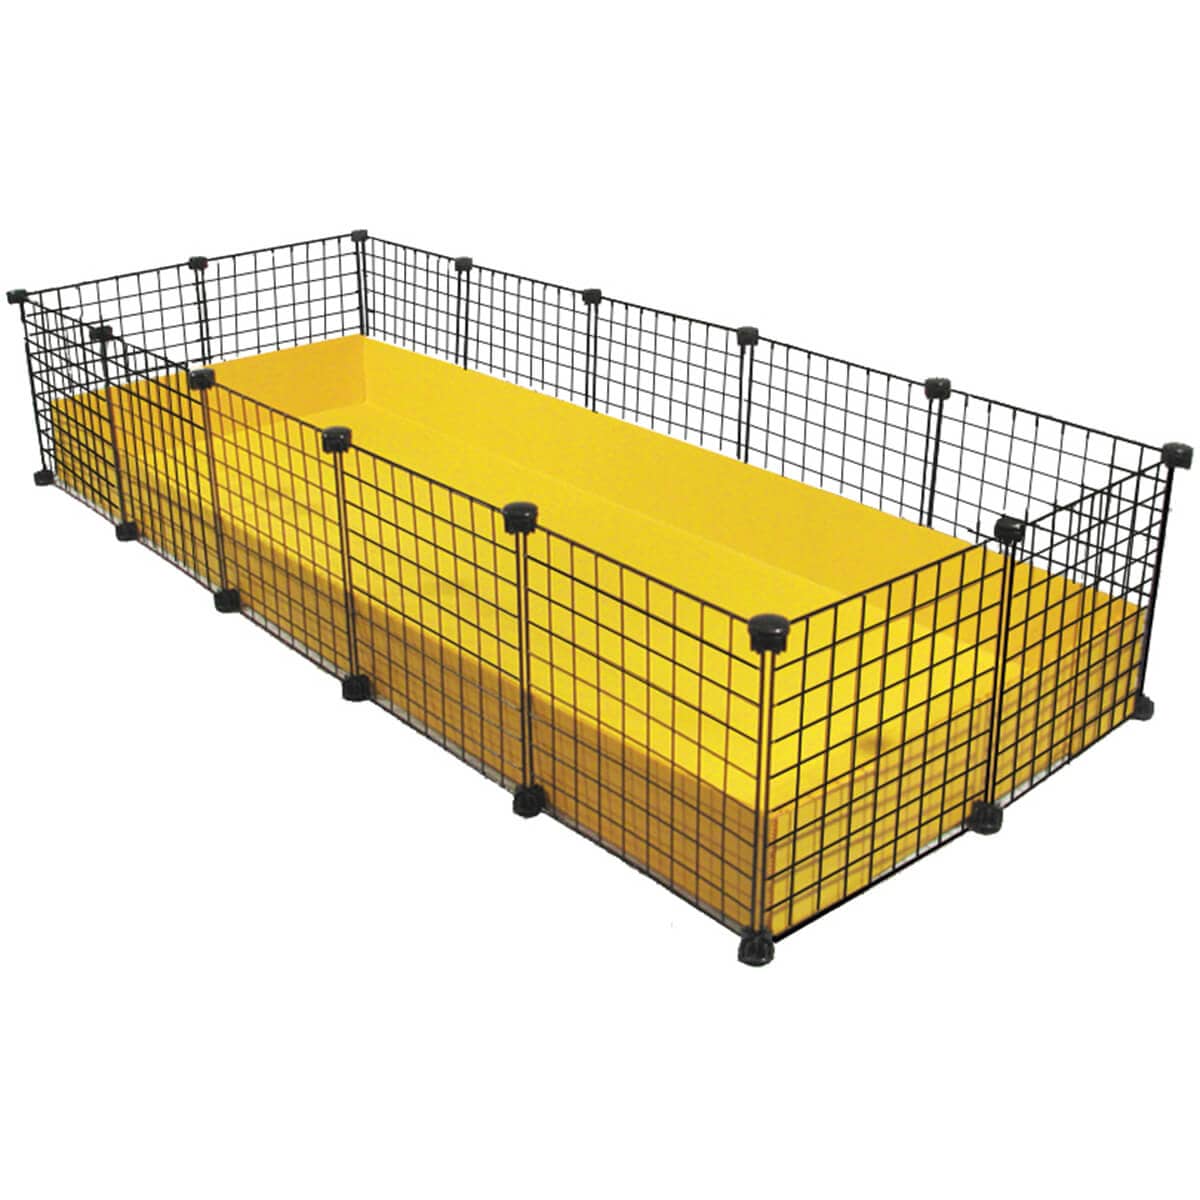 XL yellow C&C guinea pig cages with black grids and connectors